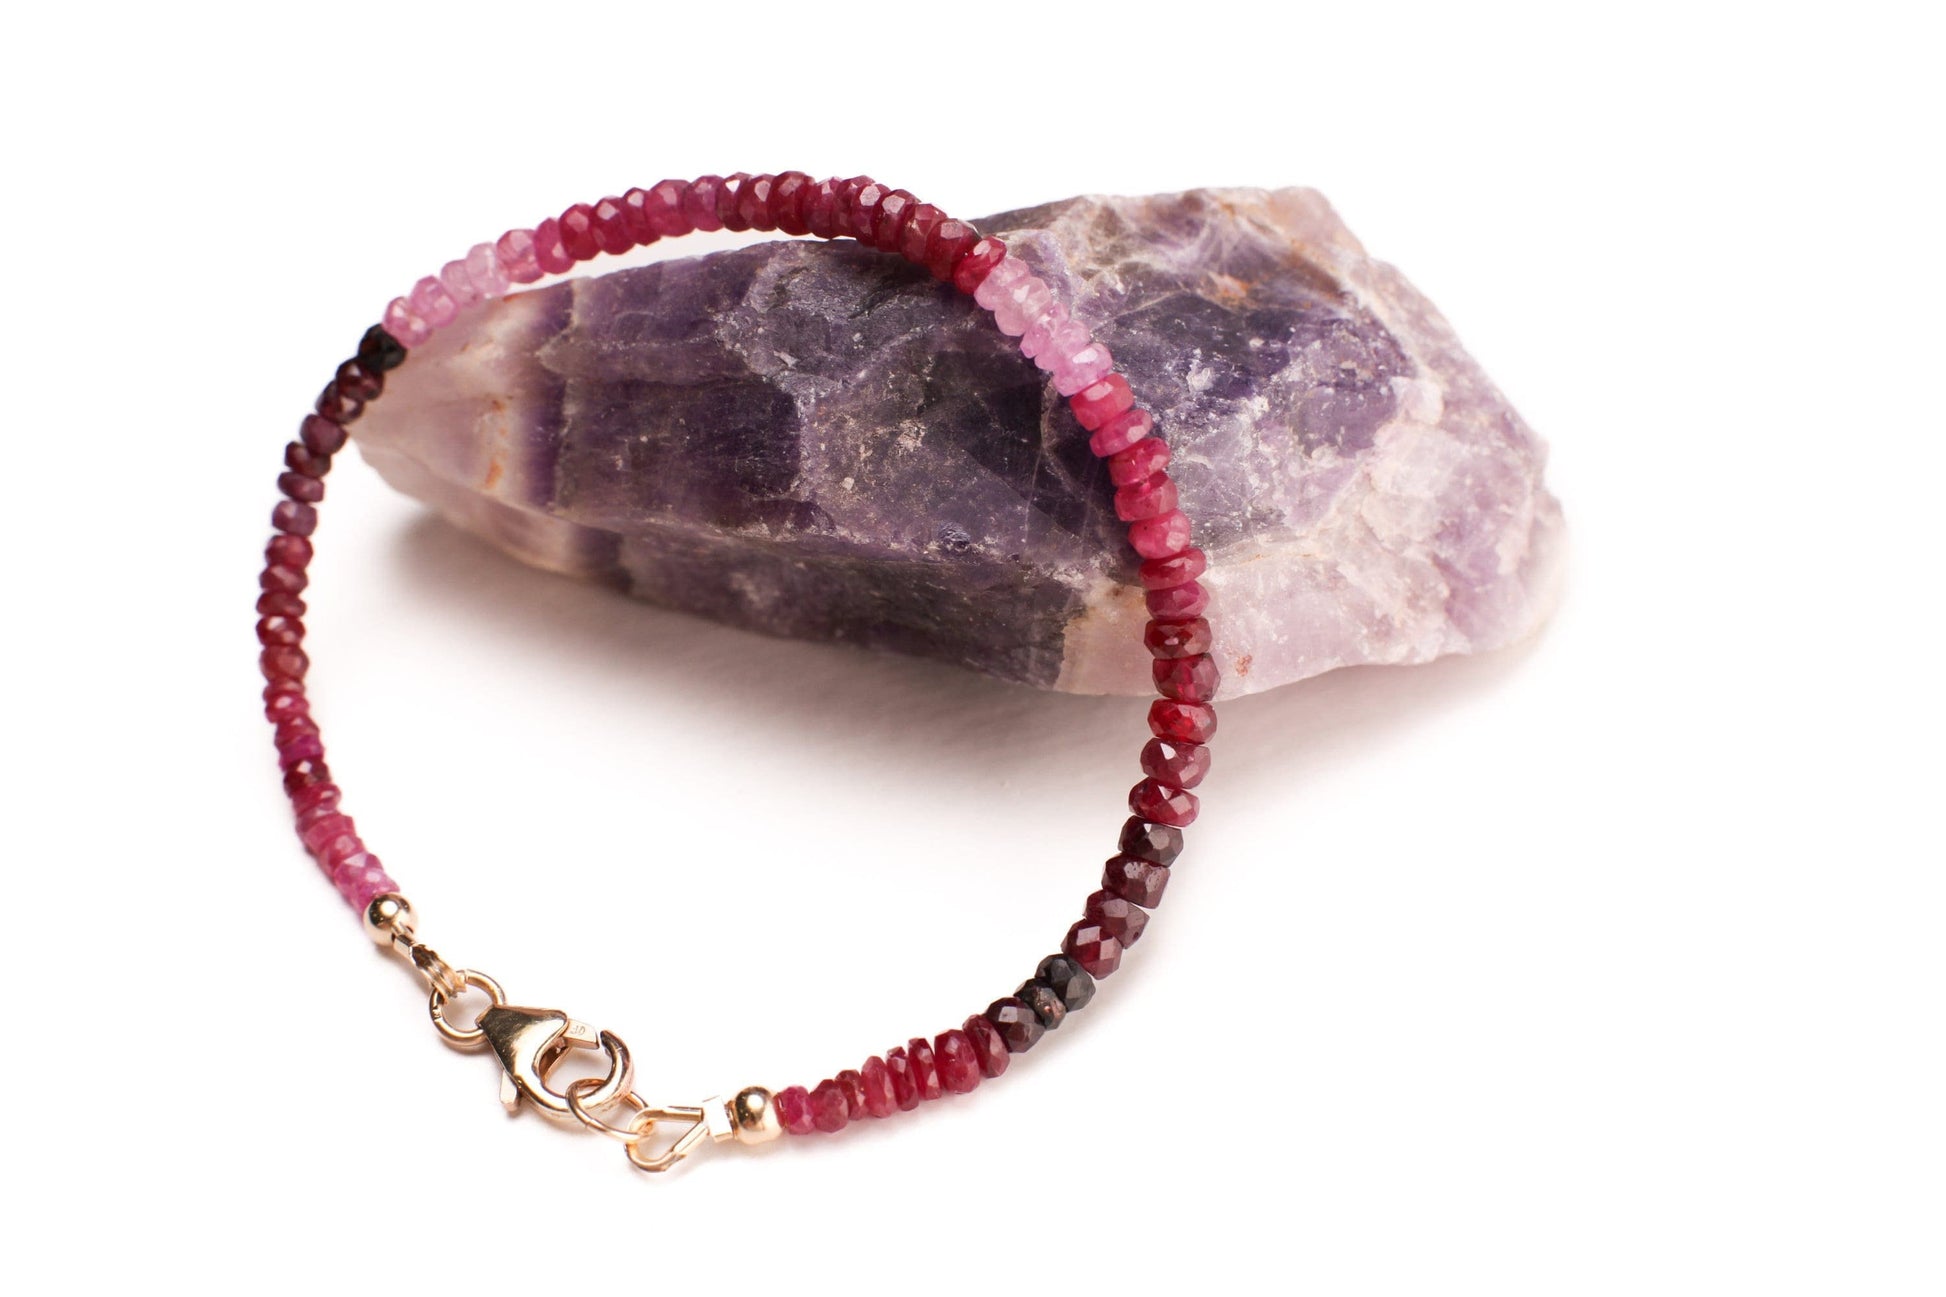 Ombre Ruby Faceted Rondelle 3mm Bracelet in 925 Sterling Silver or 14K Gold Filled Clasp, AAA Quality Natural Precious gift for her